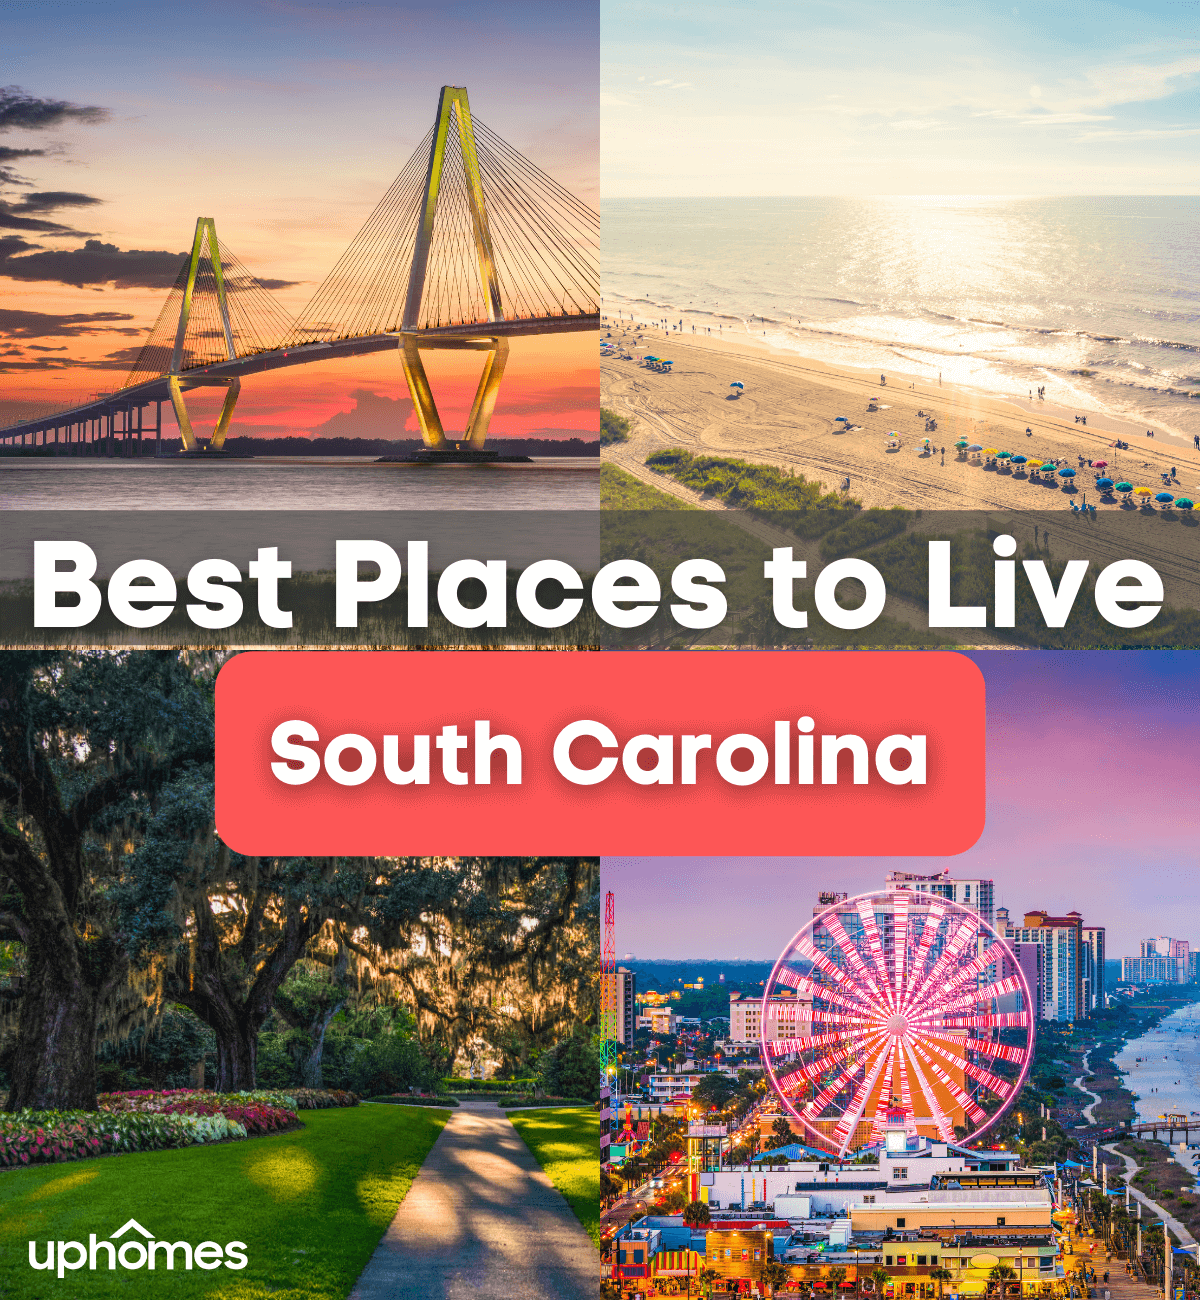 What are the best places to live in South Carolina